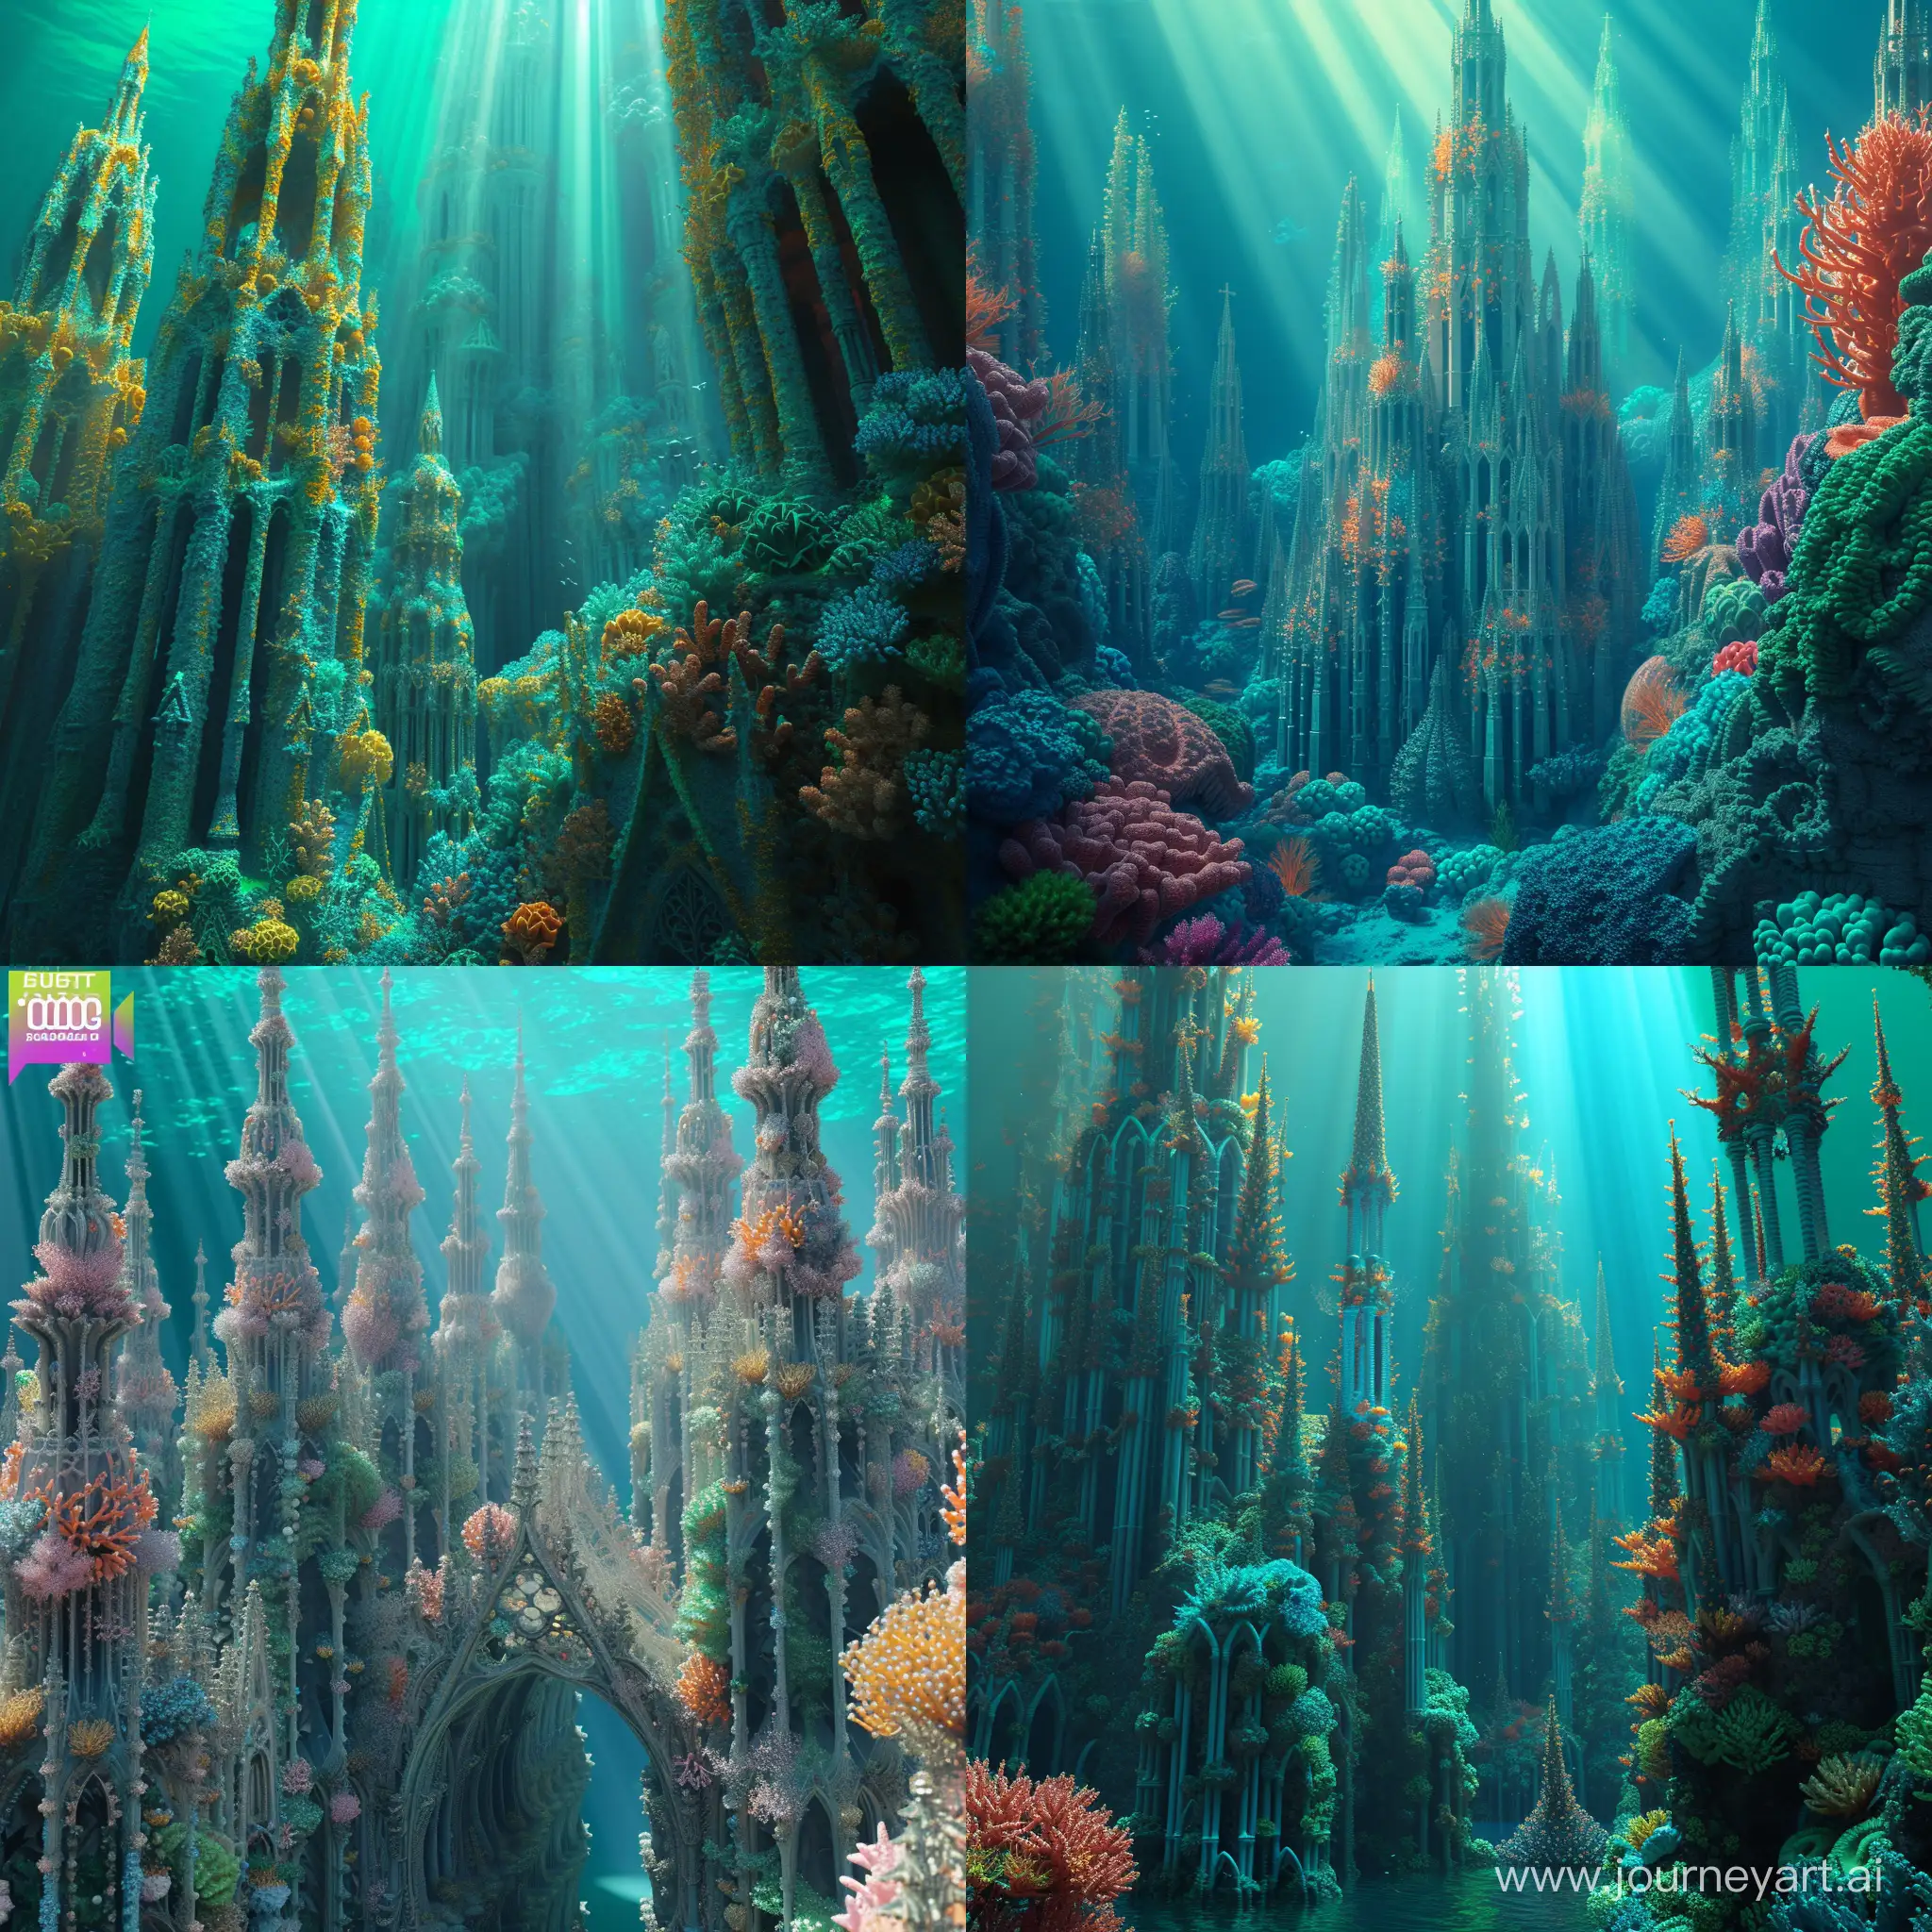 Craft a mesmerizing 3D underwater scene that presents an otherworldly architectural wonder. a cathedral made entirely of vibrant coral formations. The cathedral’s towering spires should mimic the elegance of Gothic architecture, while the coral adds an organic, surreal twist. Experiment with different hues of blues and greens to capture the underwater lighting, with beams of sunlight filtering through the water and illuminating the coral’s intricate textures. Let the scene evoke a sense of wonder and tranquility as if exploring a hidden aquatic realm